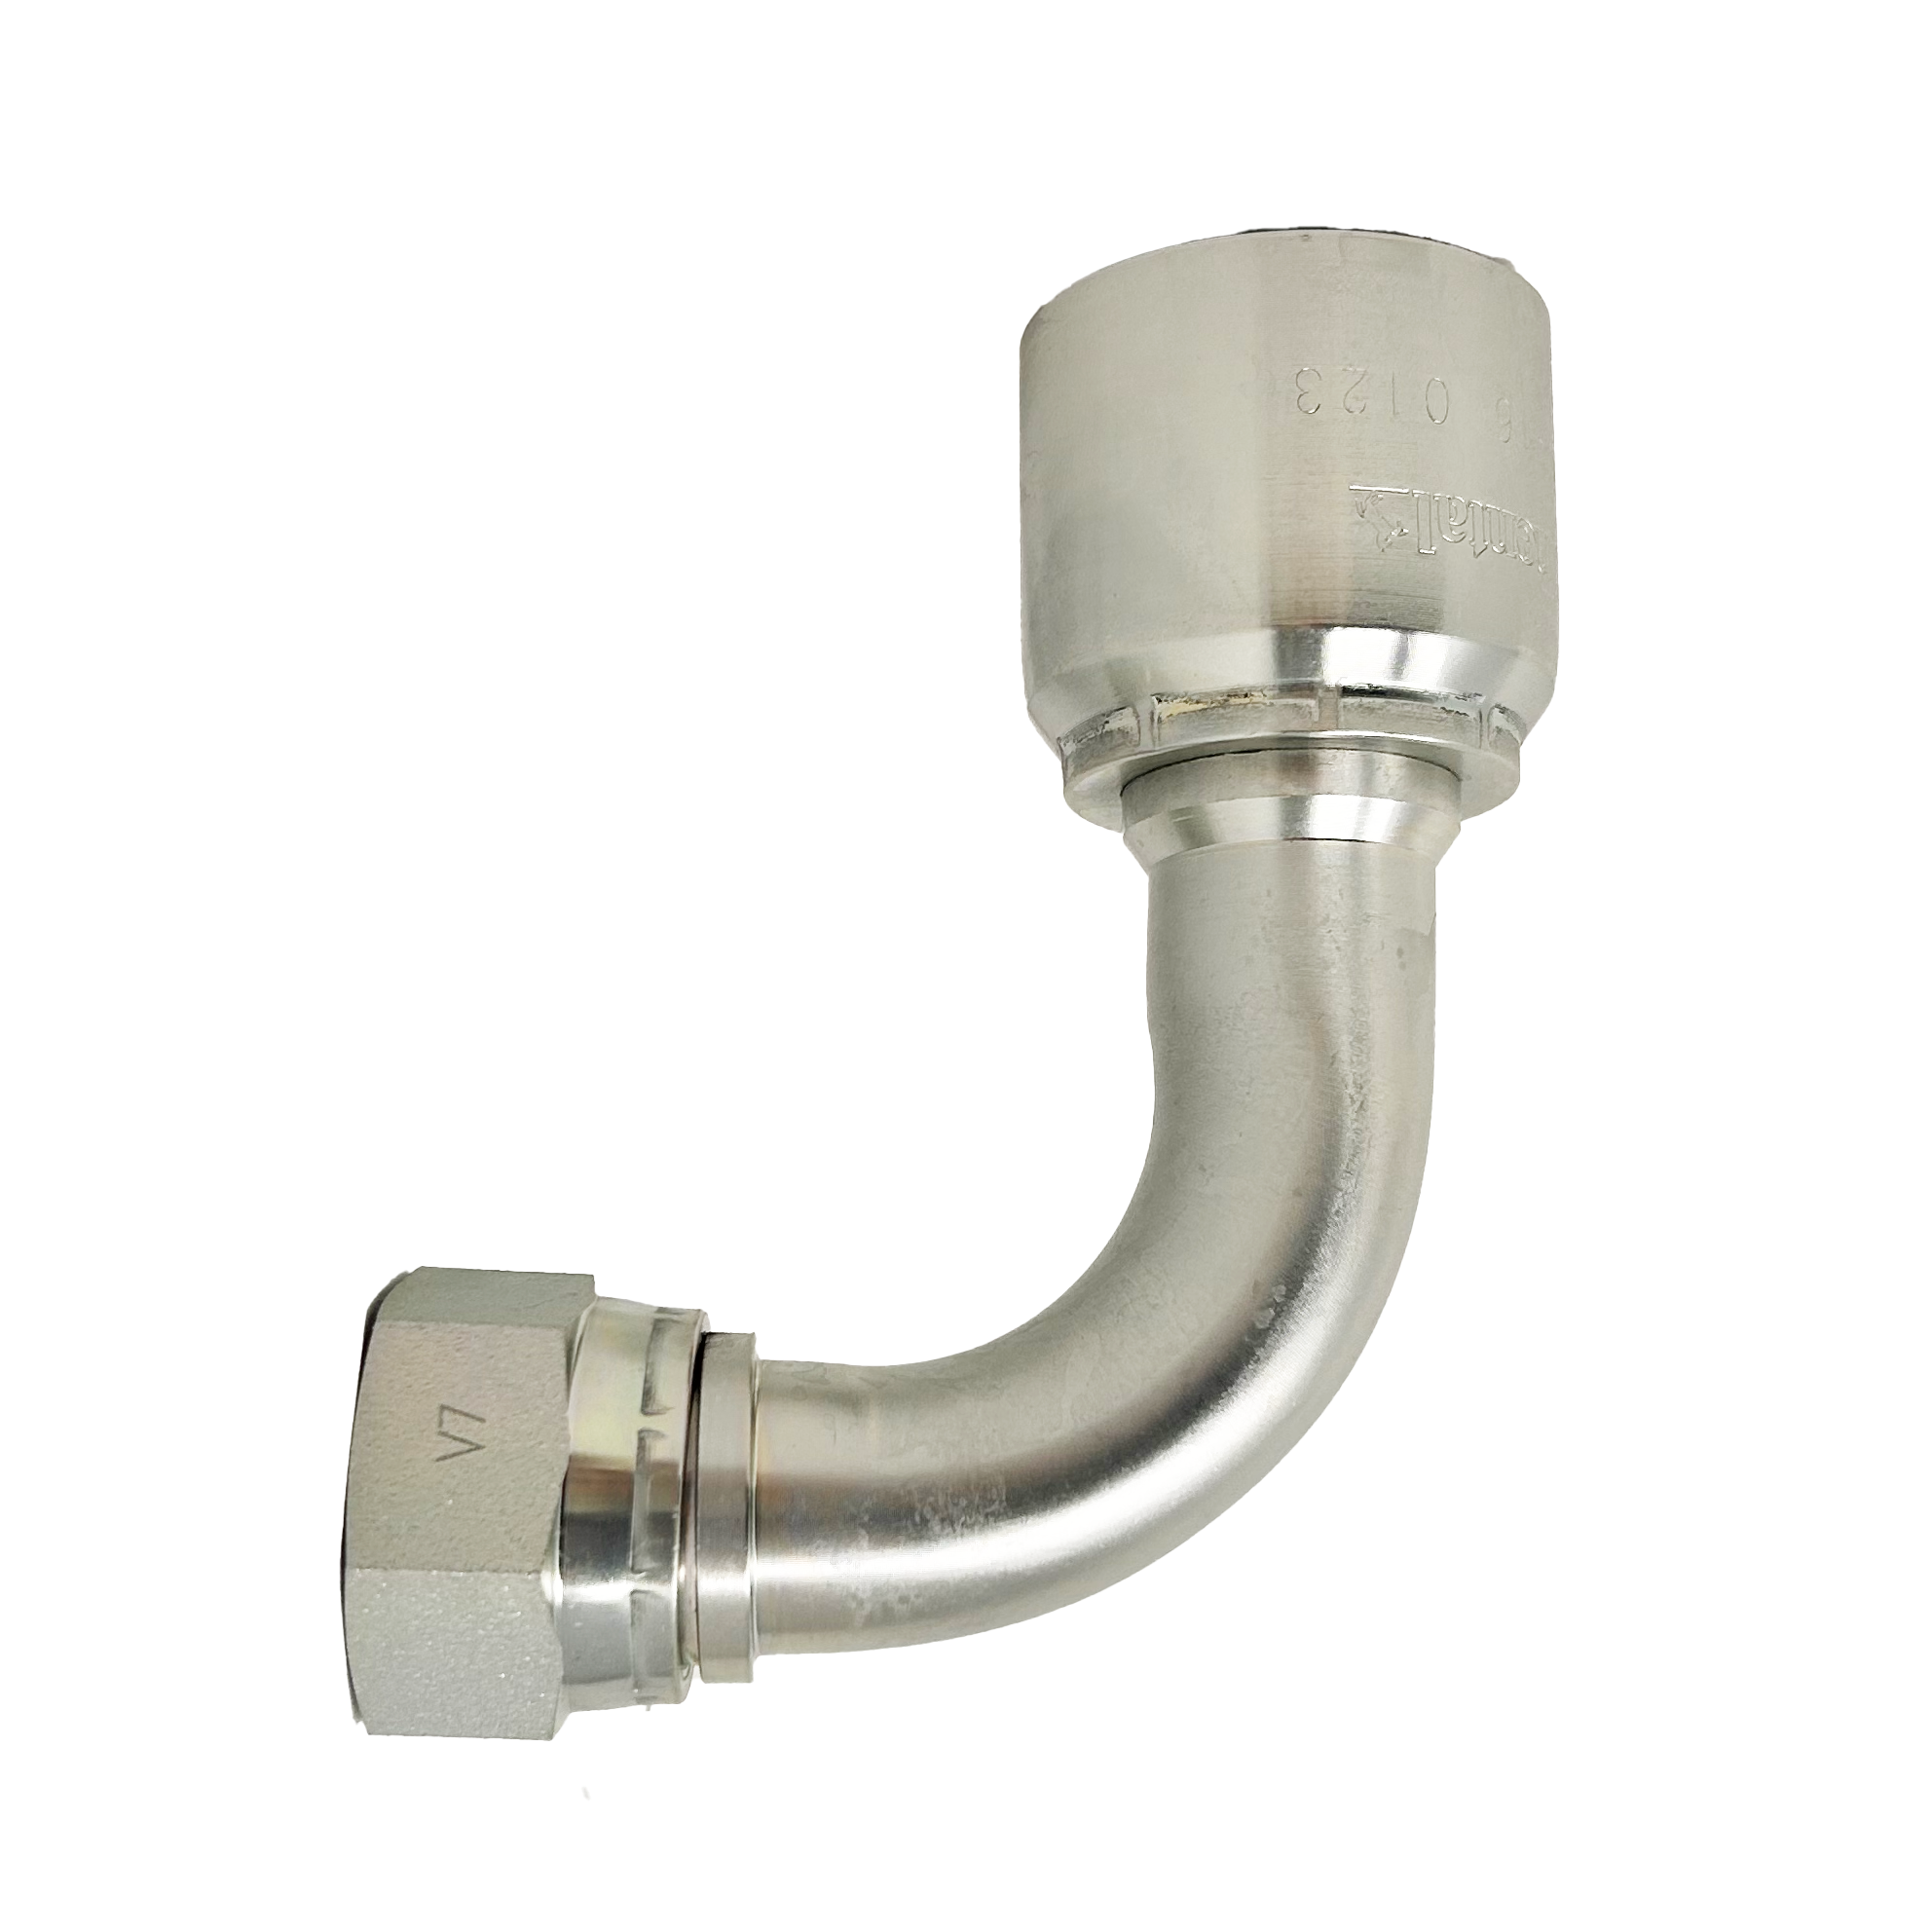 B2-JCFX90-0604: Continental Hose Fitting, 0.375 (3/8") Hose ID x 7/16-20 Female JIC, 90-Degree Swivel Connection